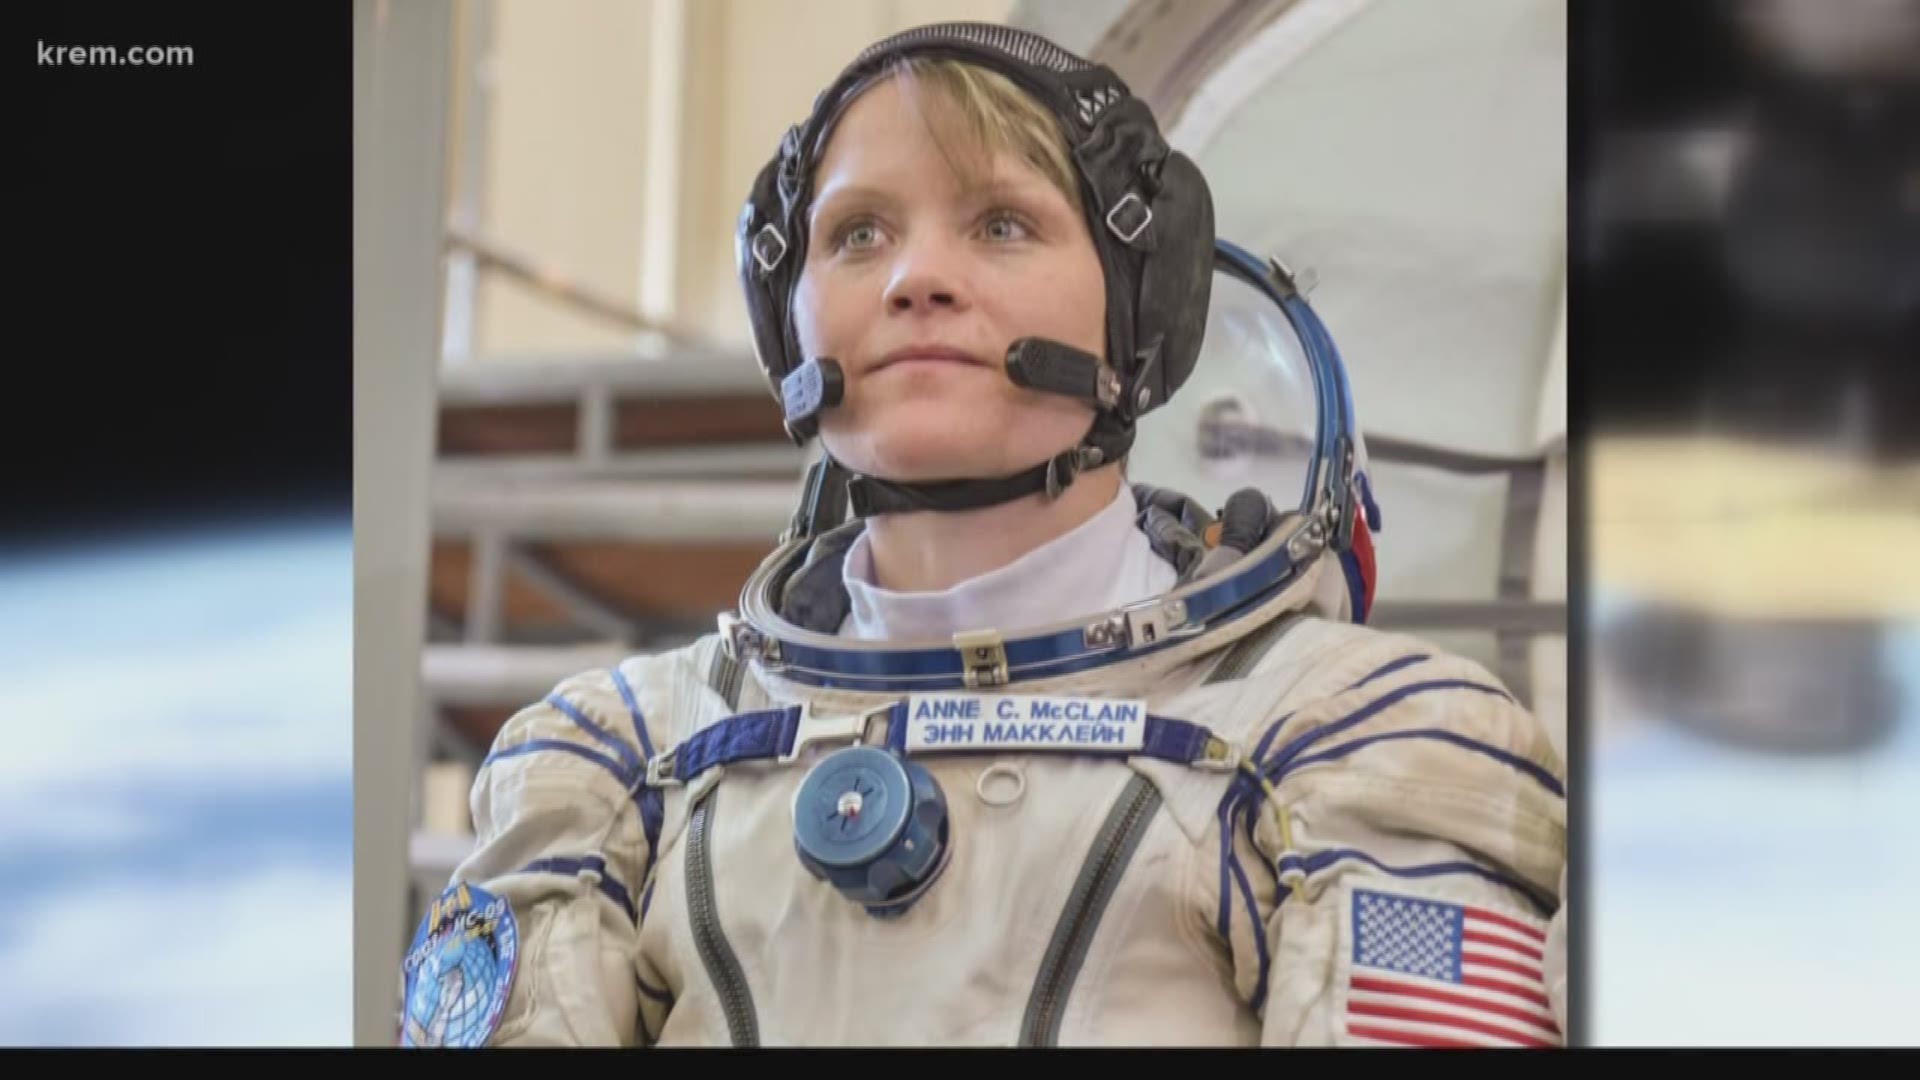 Anne McClain is a G-Prep alum and is going into her third month aboard the International Space Station. Today she took time to live video chat with several G-Prep students.